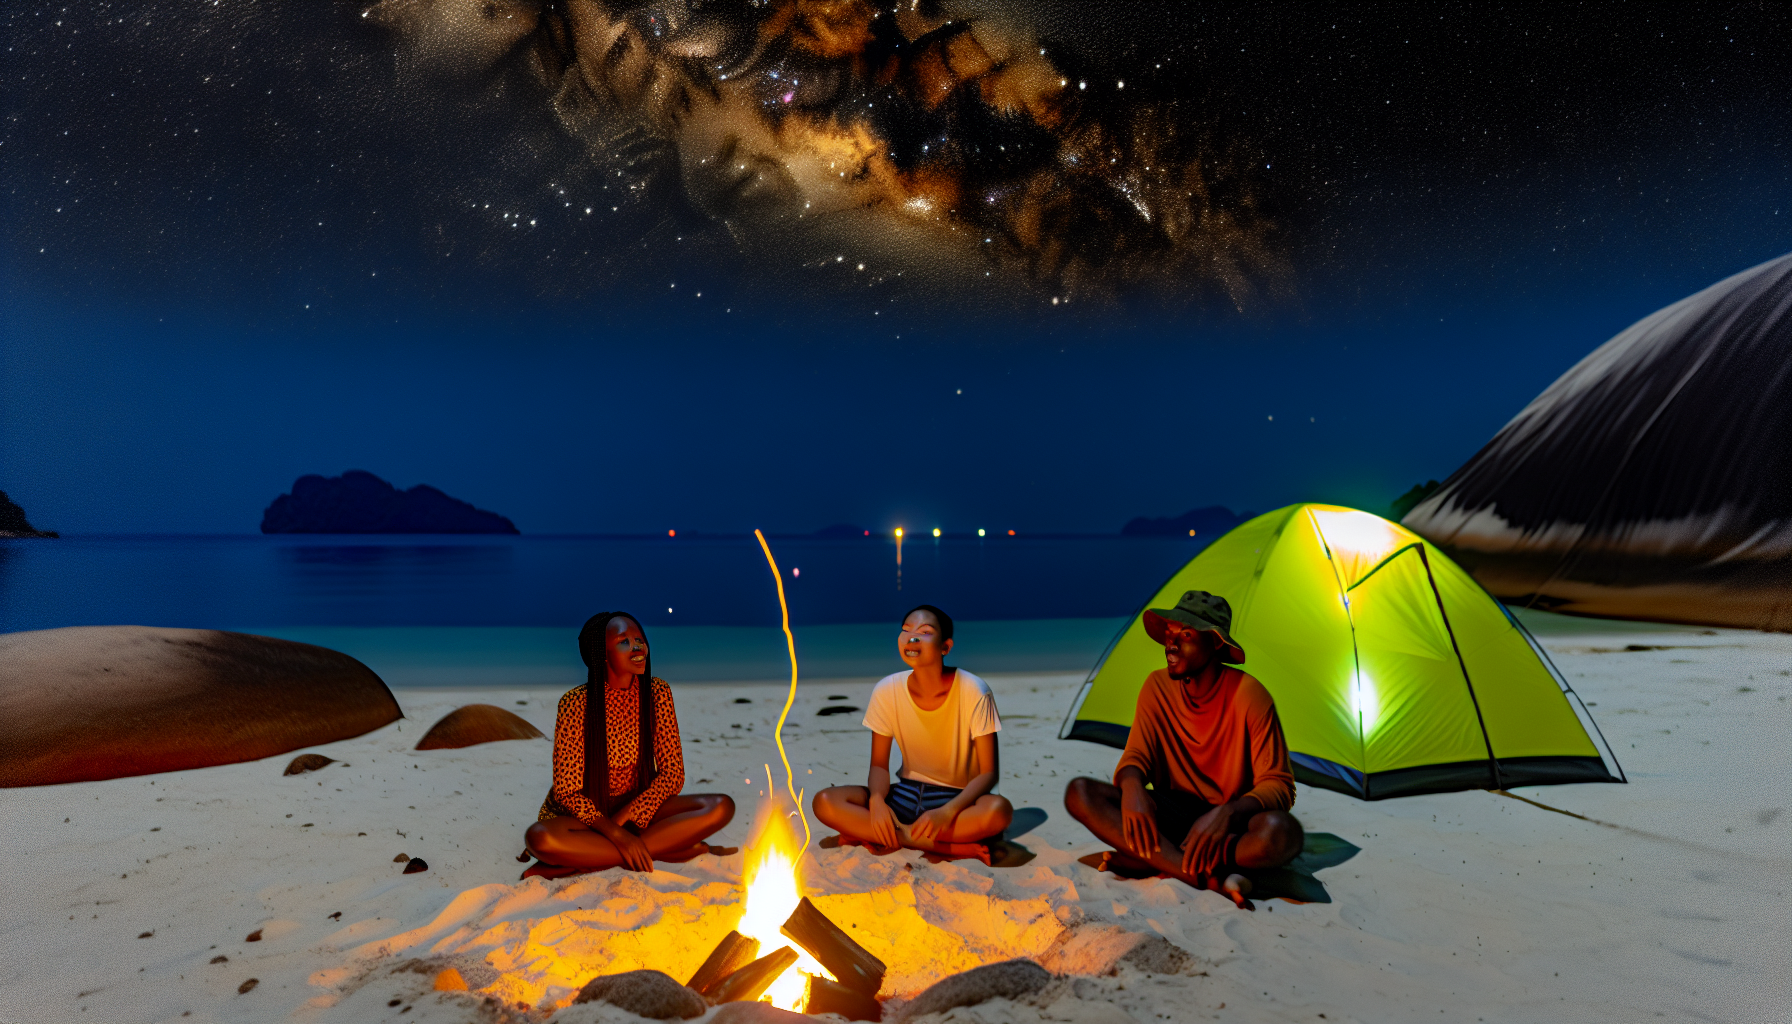 Camping under the stars on the beaches of Surin Islands